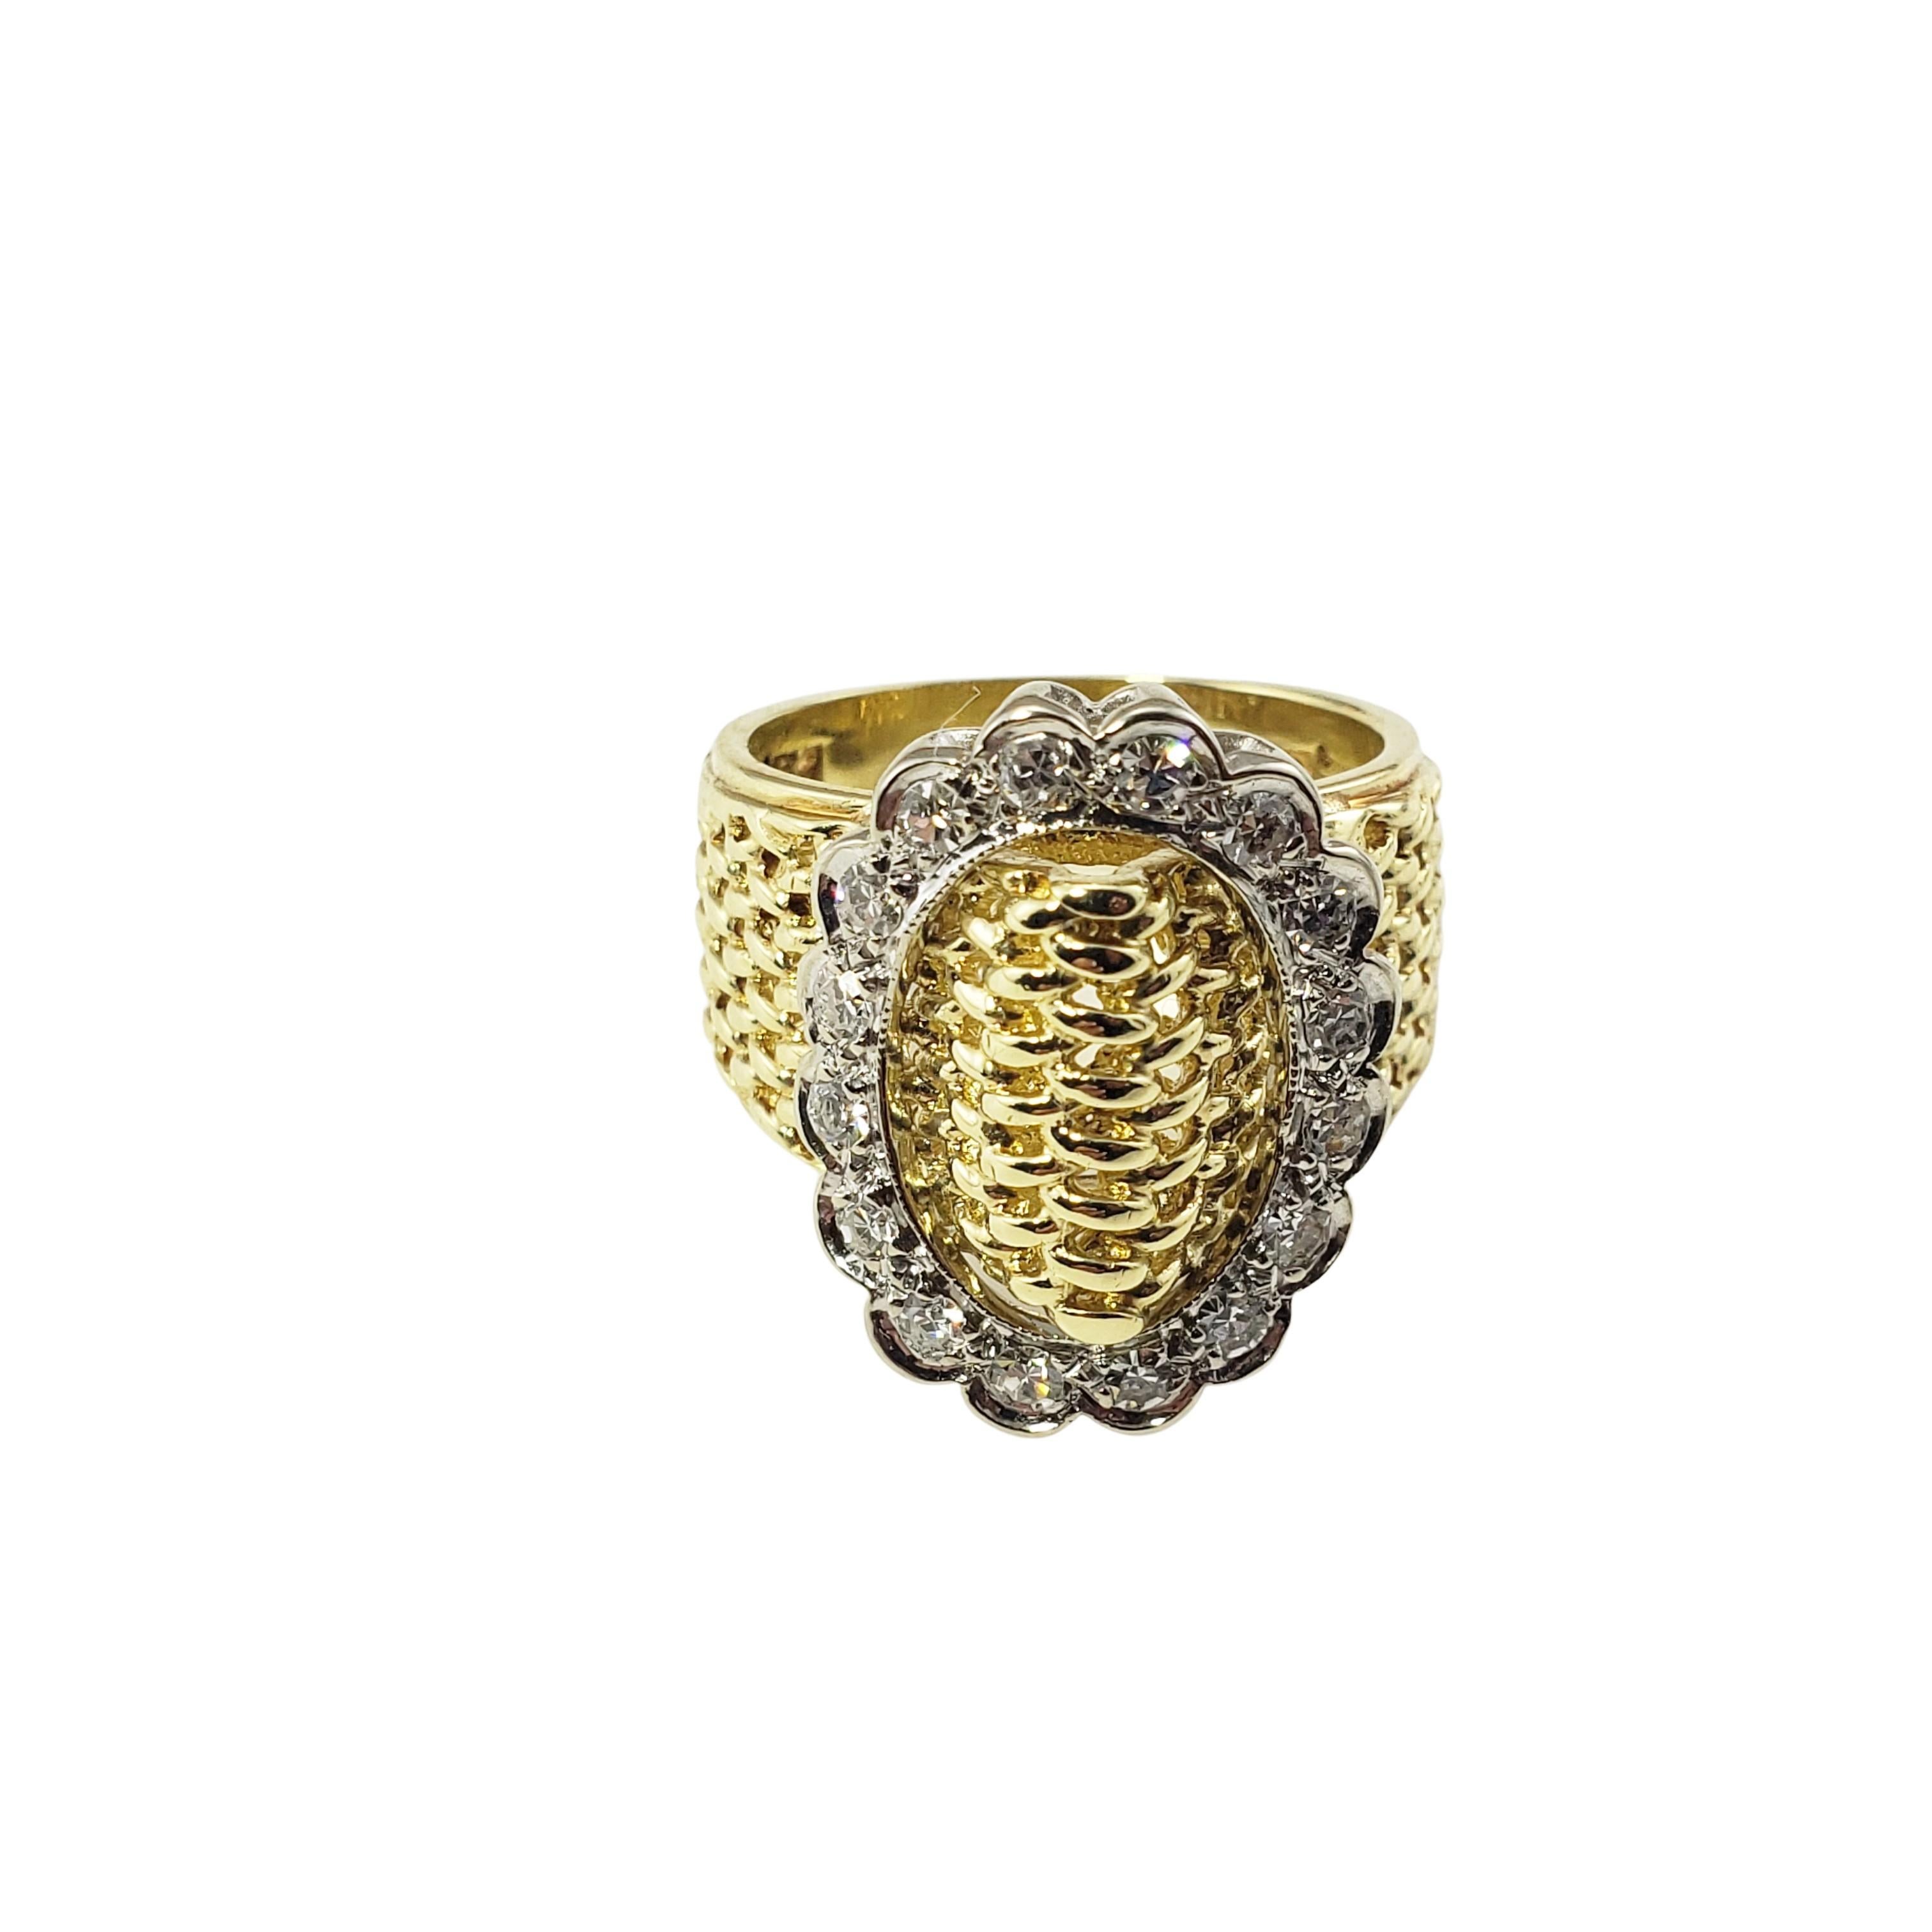 14 Karat Yellow Gold and Diamond Ring Size 6.25-

This stunning ring features 16 round single cut diamonds set in classic 14K yellow gold.  Width:  19 mm.  Shank:  6 mm.

Approximate total diamond weight:  1 ct.

Diamond color: H-I

Diamond clarity: